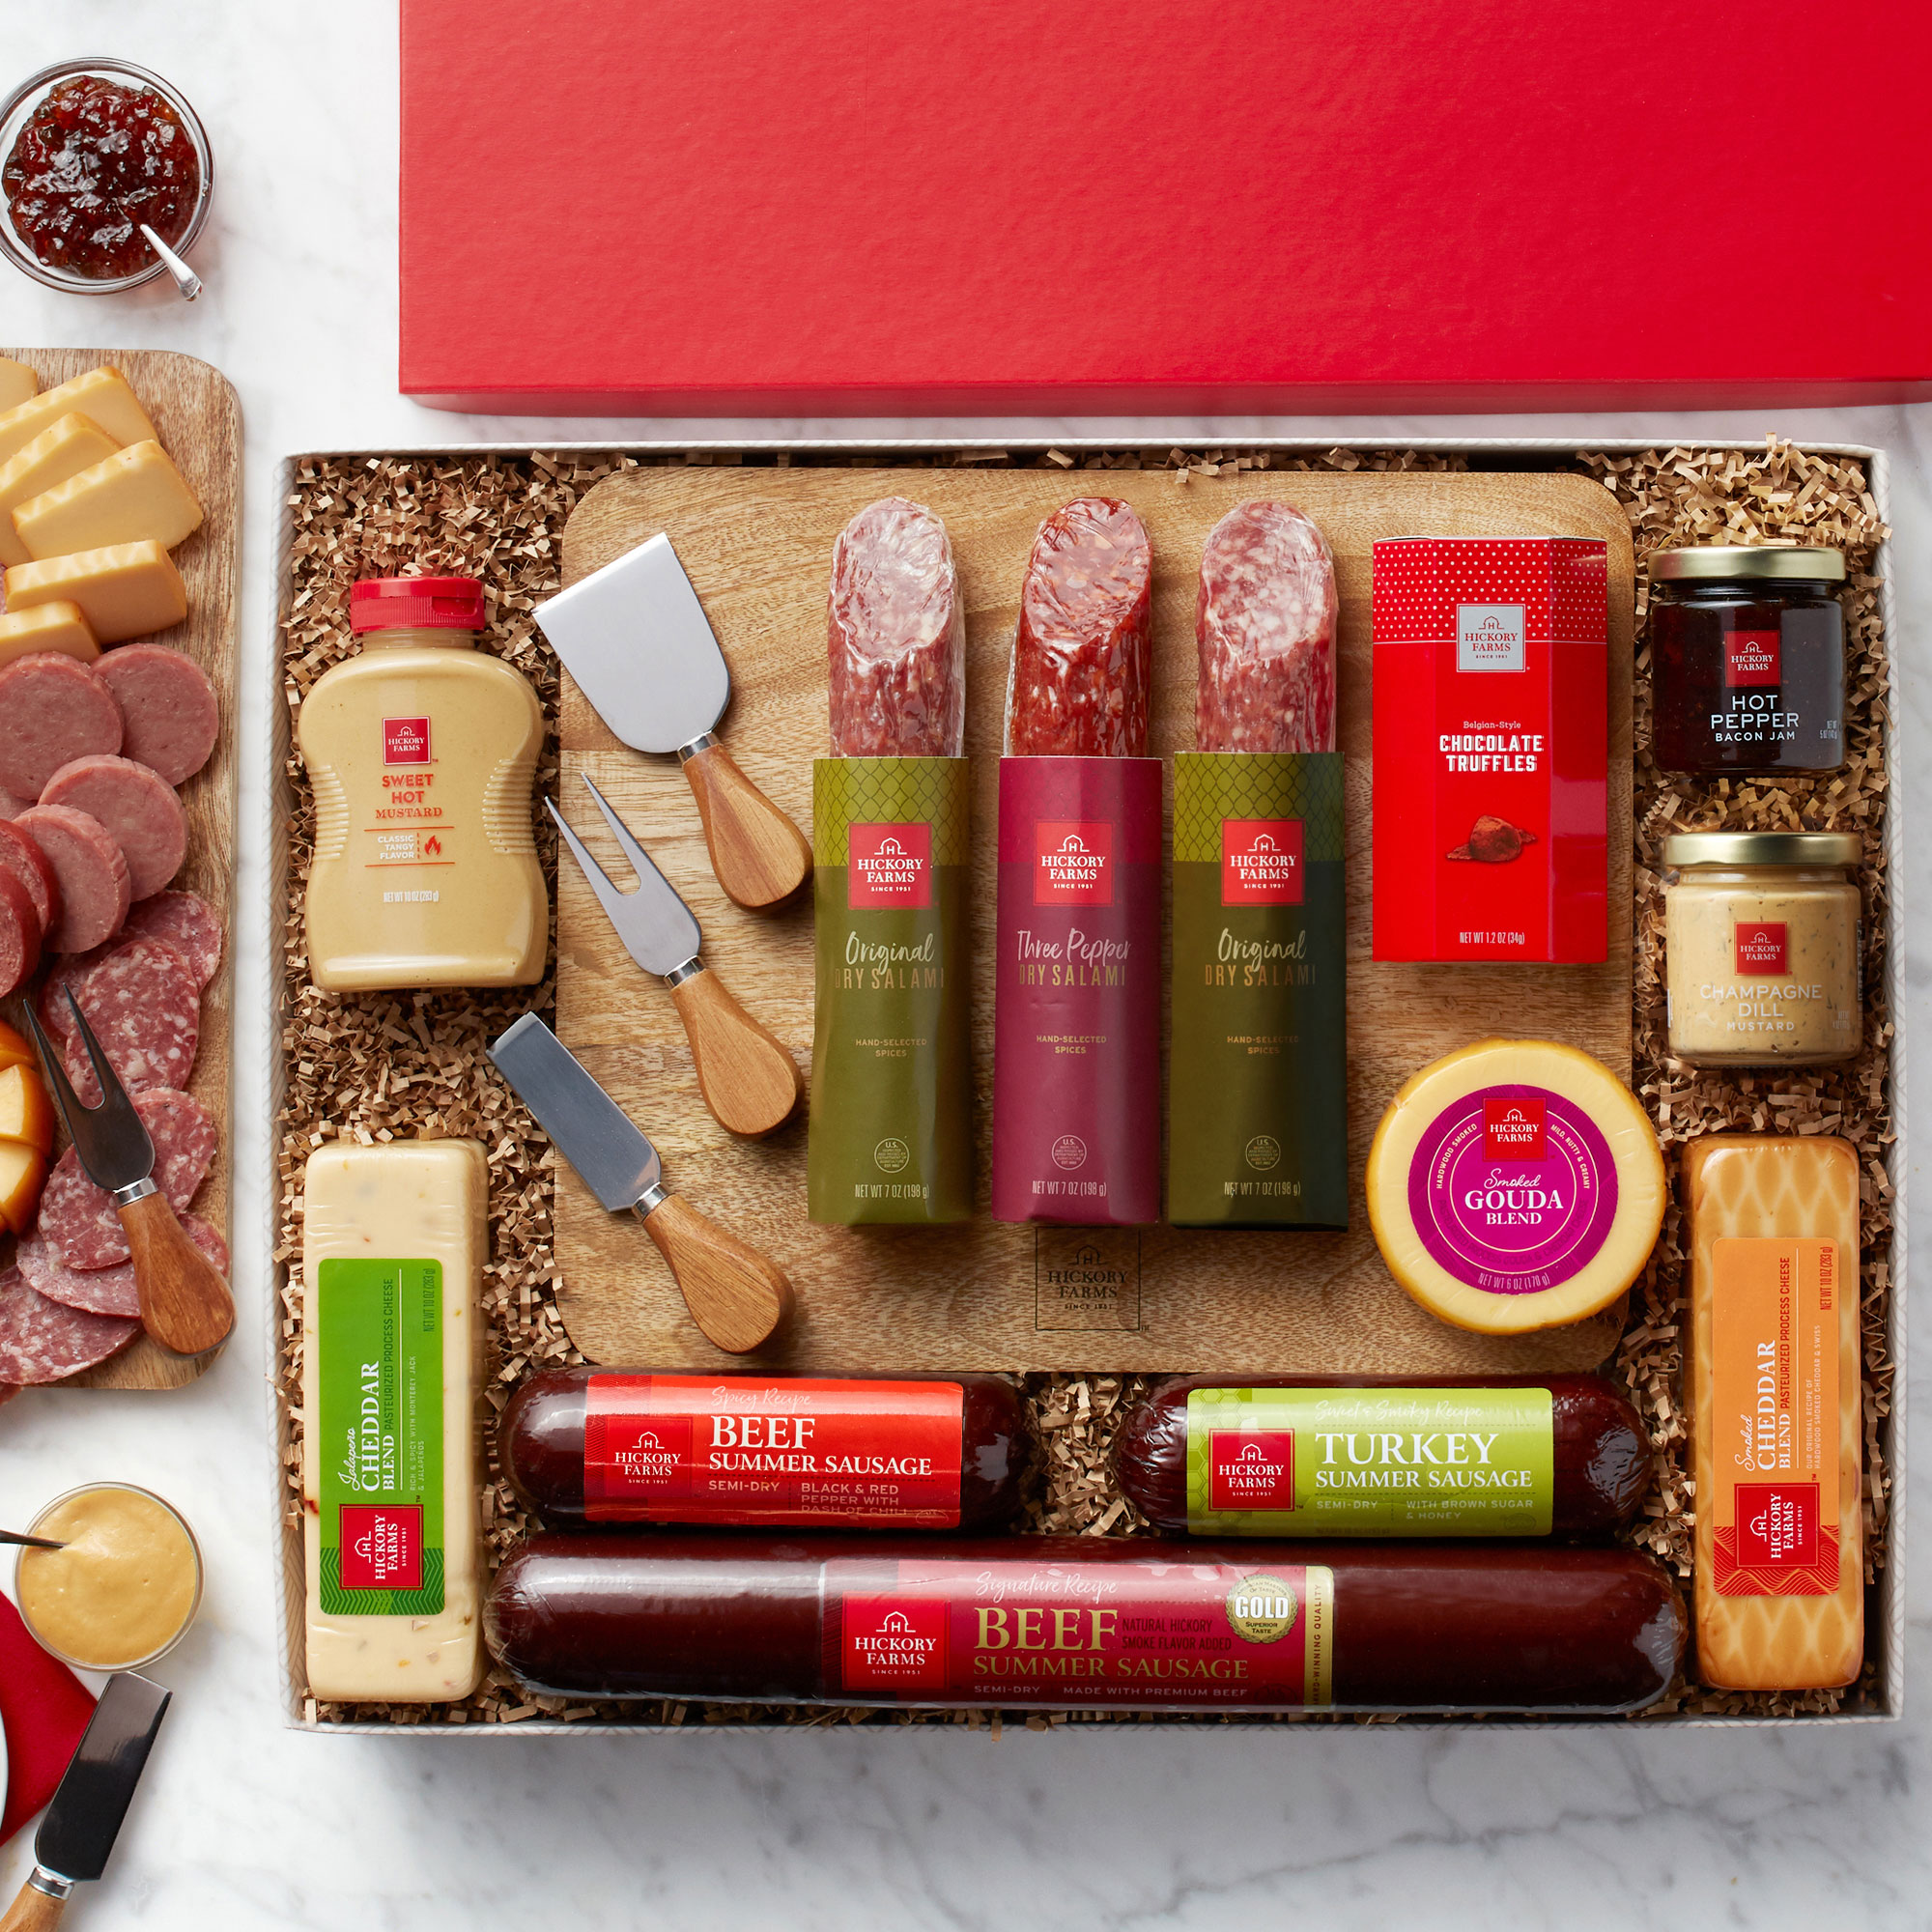 Cheese & Sausage Gift Box | Sausage & Cheese All-Time Favorites Gift Box | Hickory Farms